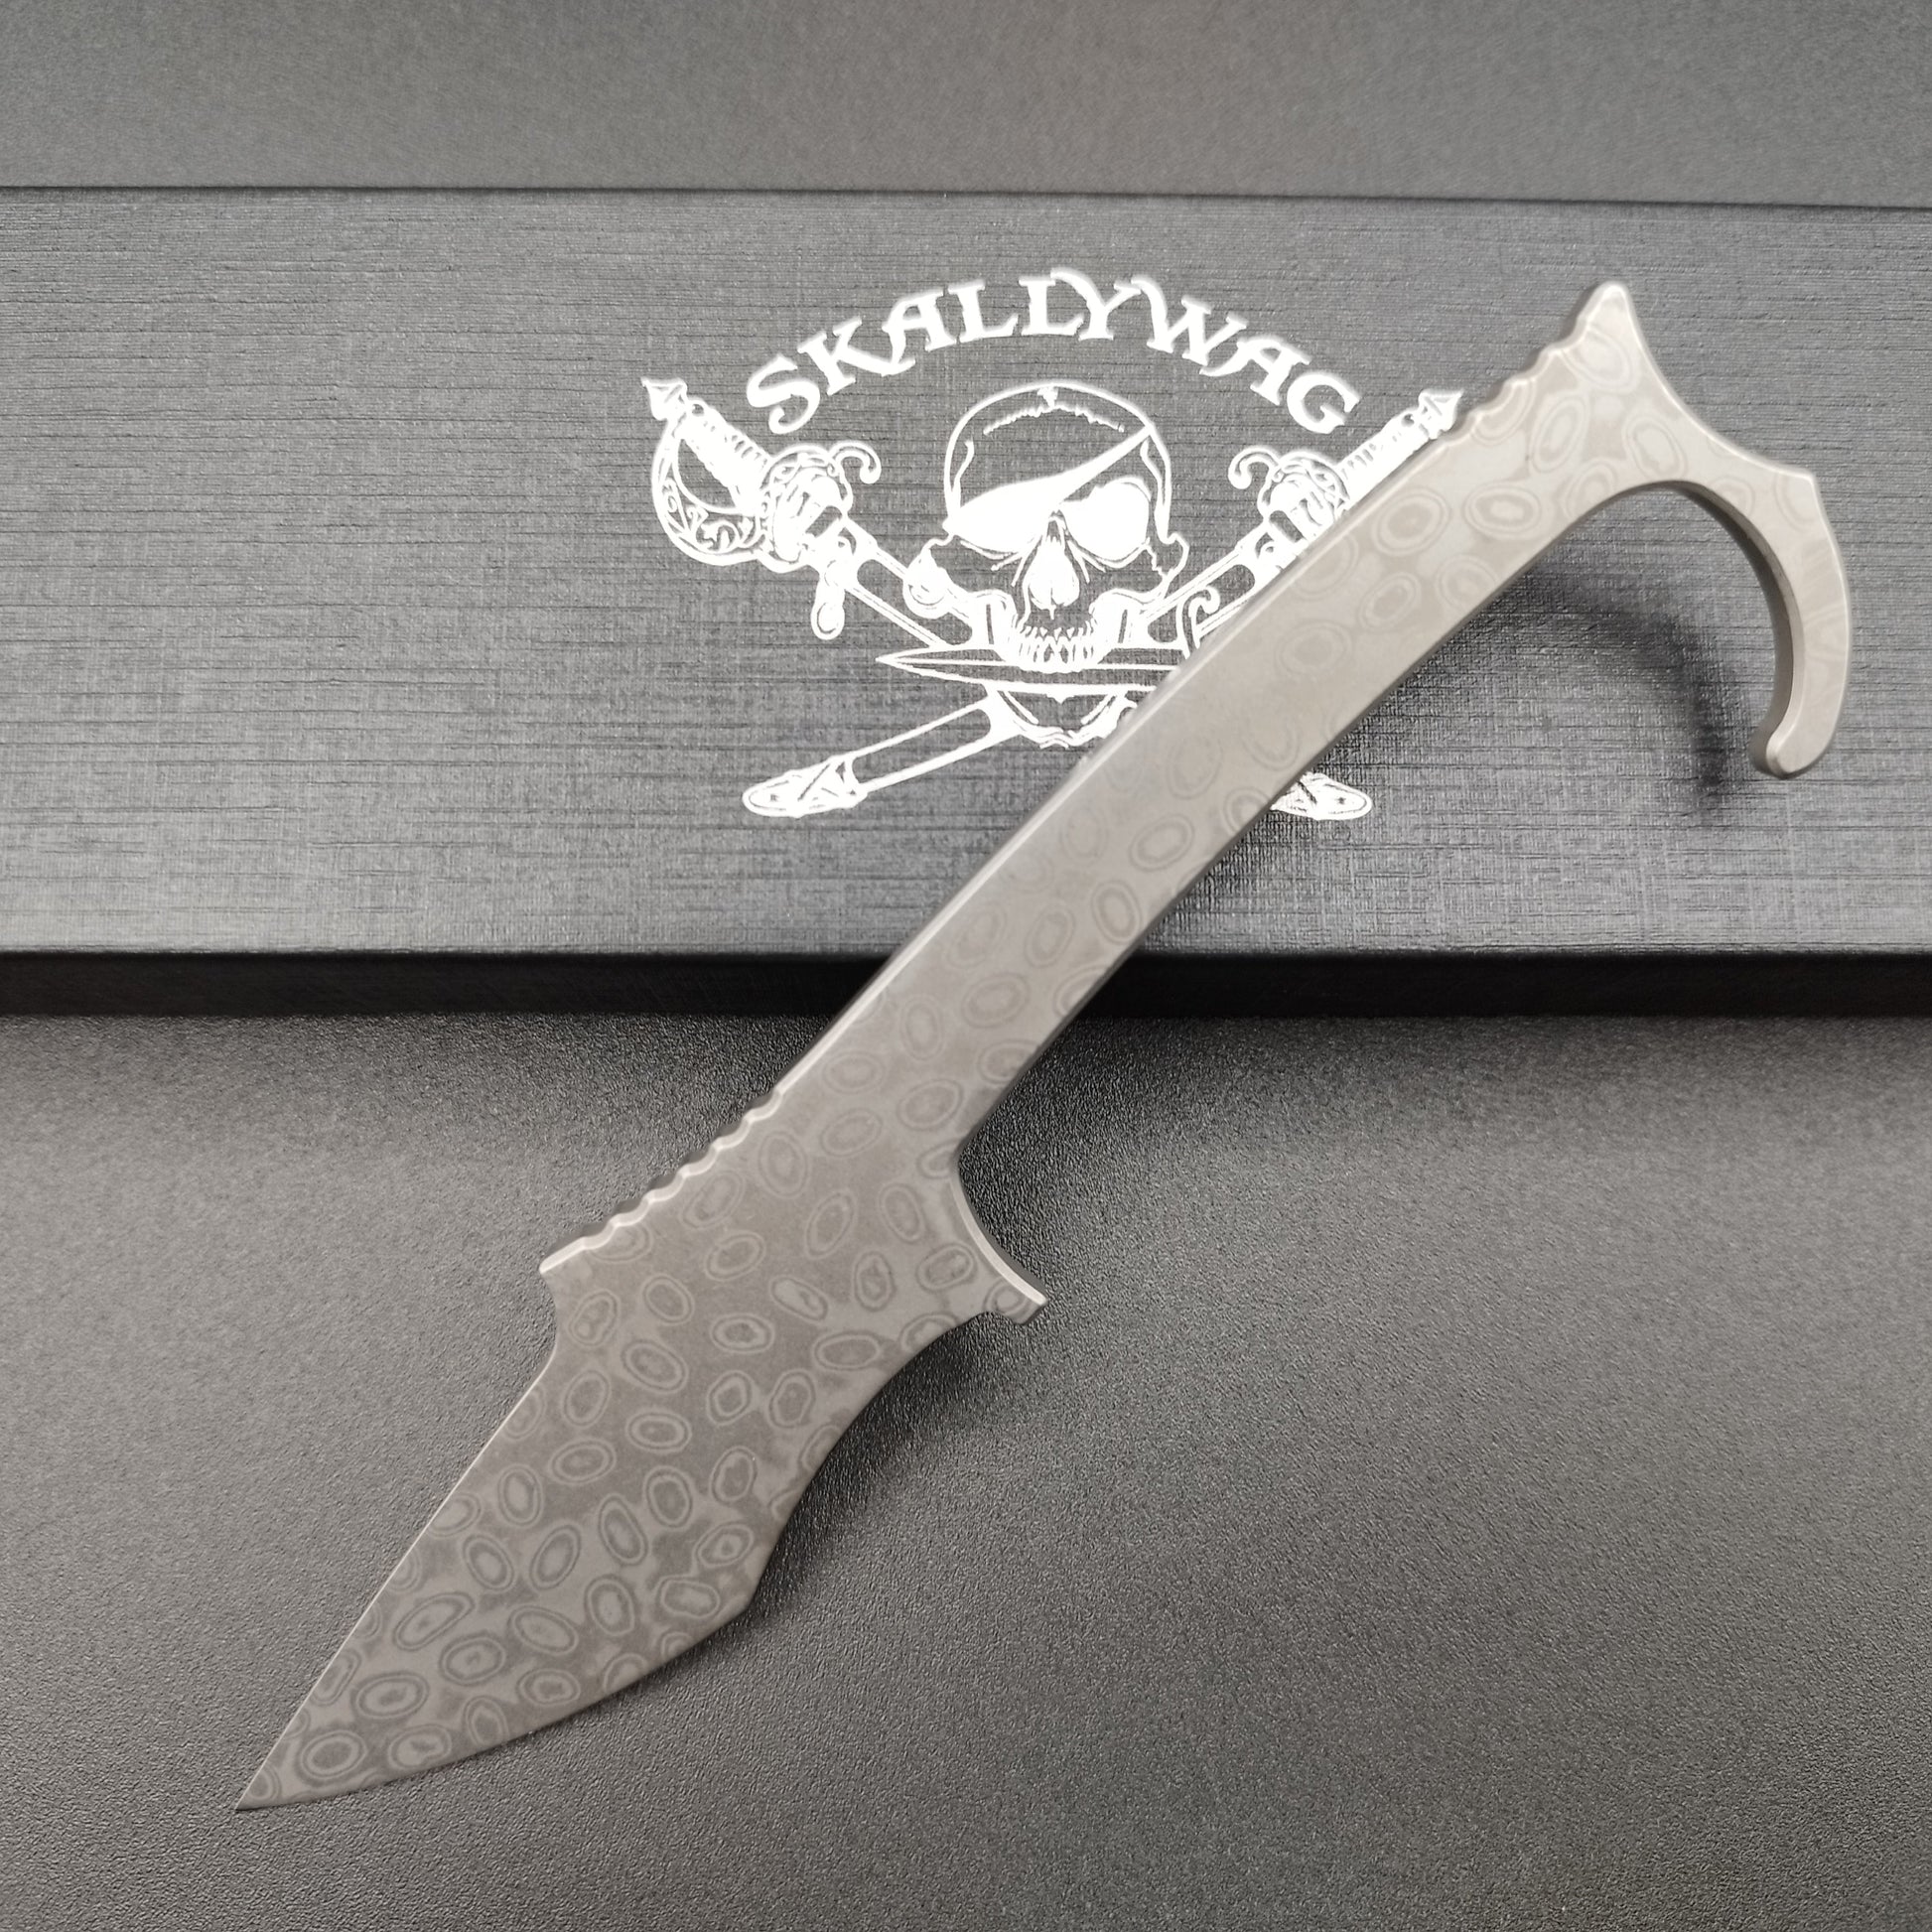 Skallywag Tactical MDV PLUS ONE Damascus mit Trainer 5